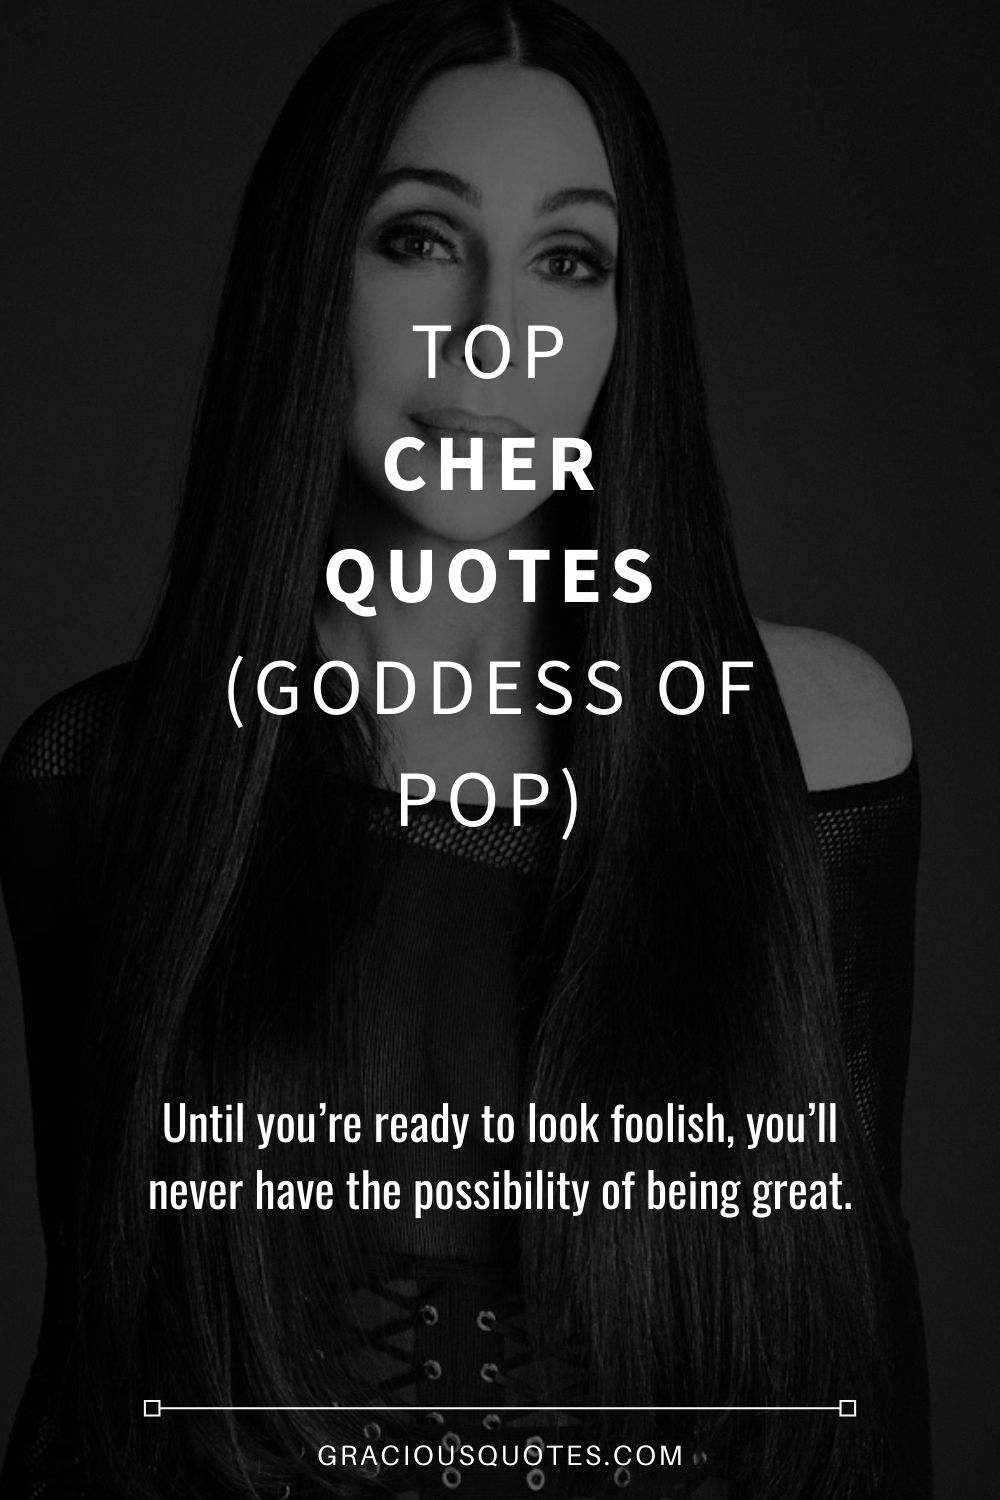 Top Cher Quotes (GODDESS OF POP) - Gracious Quotes